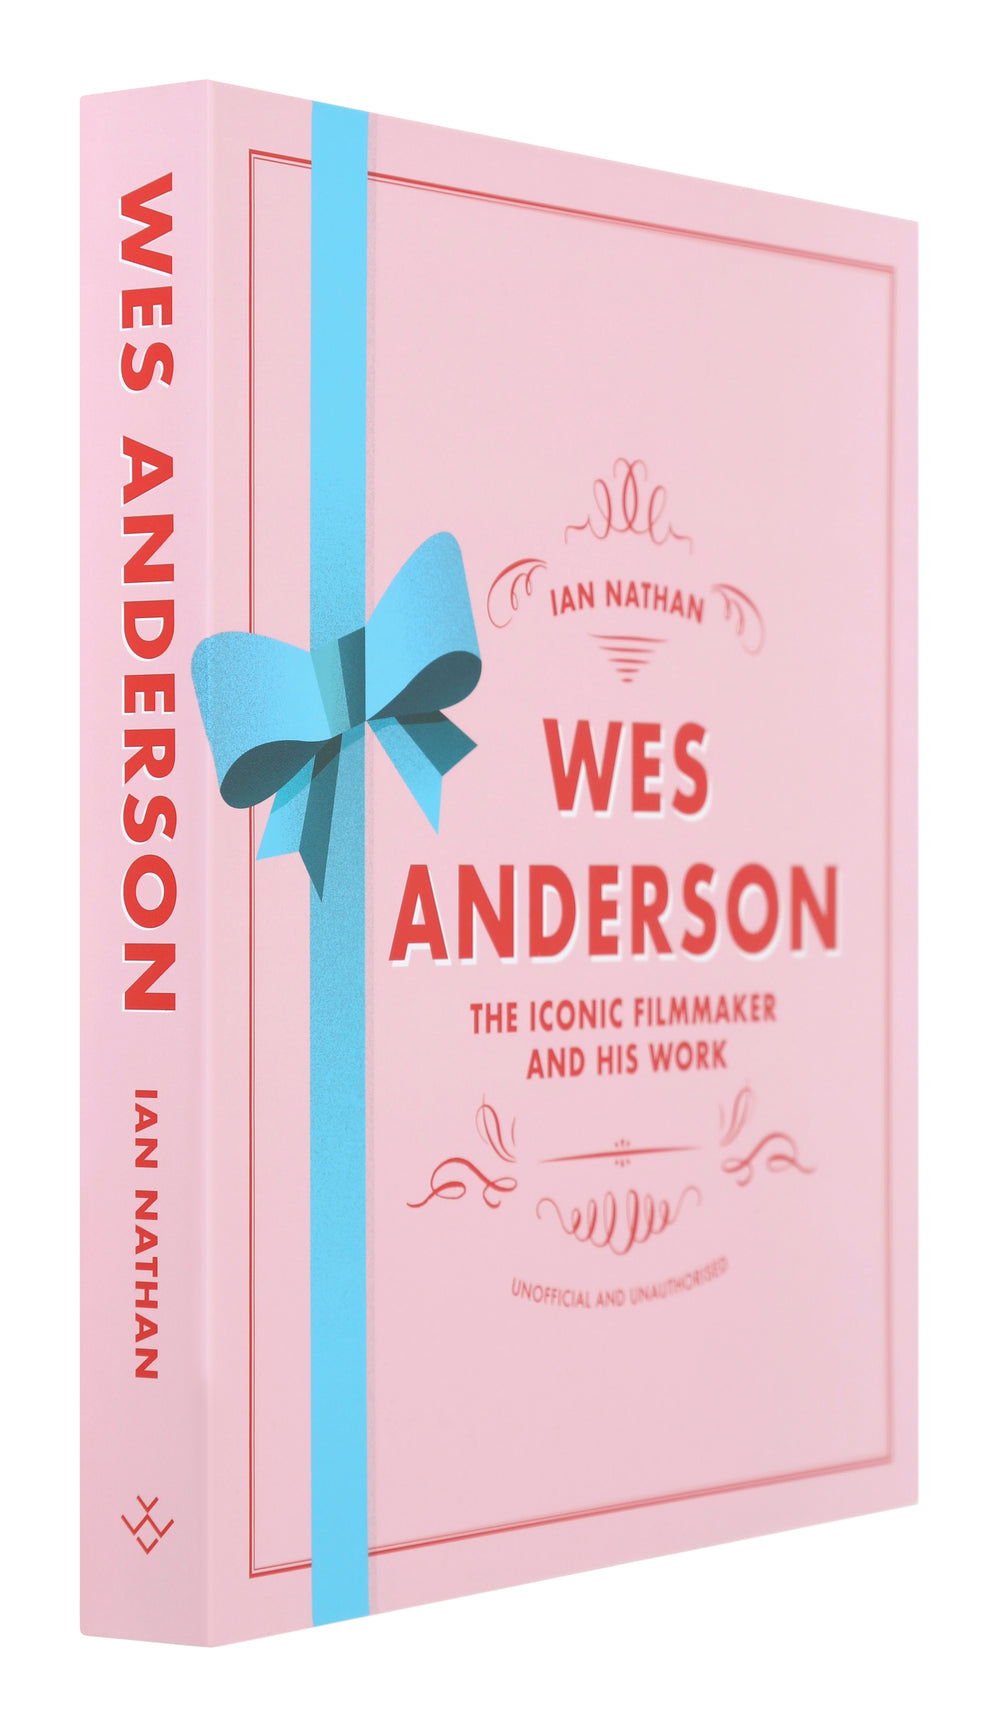 Wes Anderson: The Iconic Filmmaker and His Work